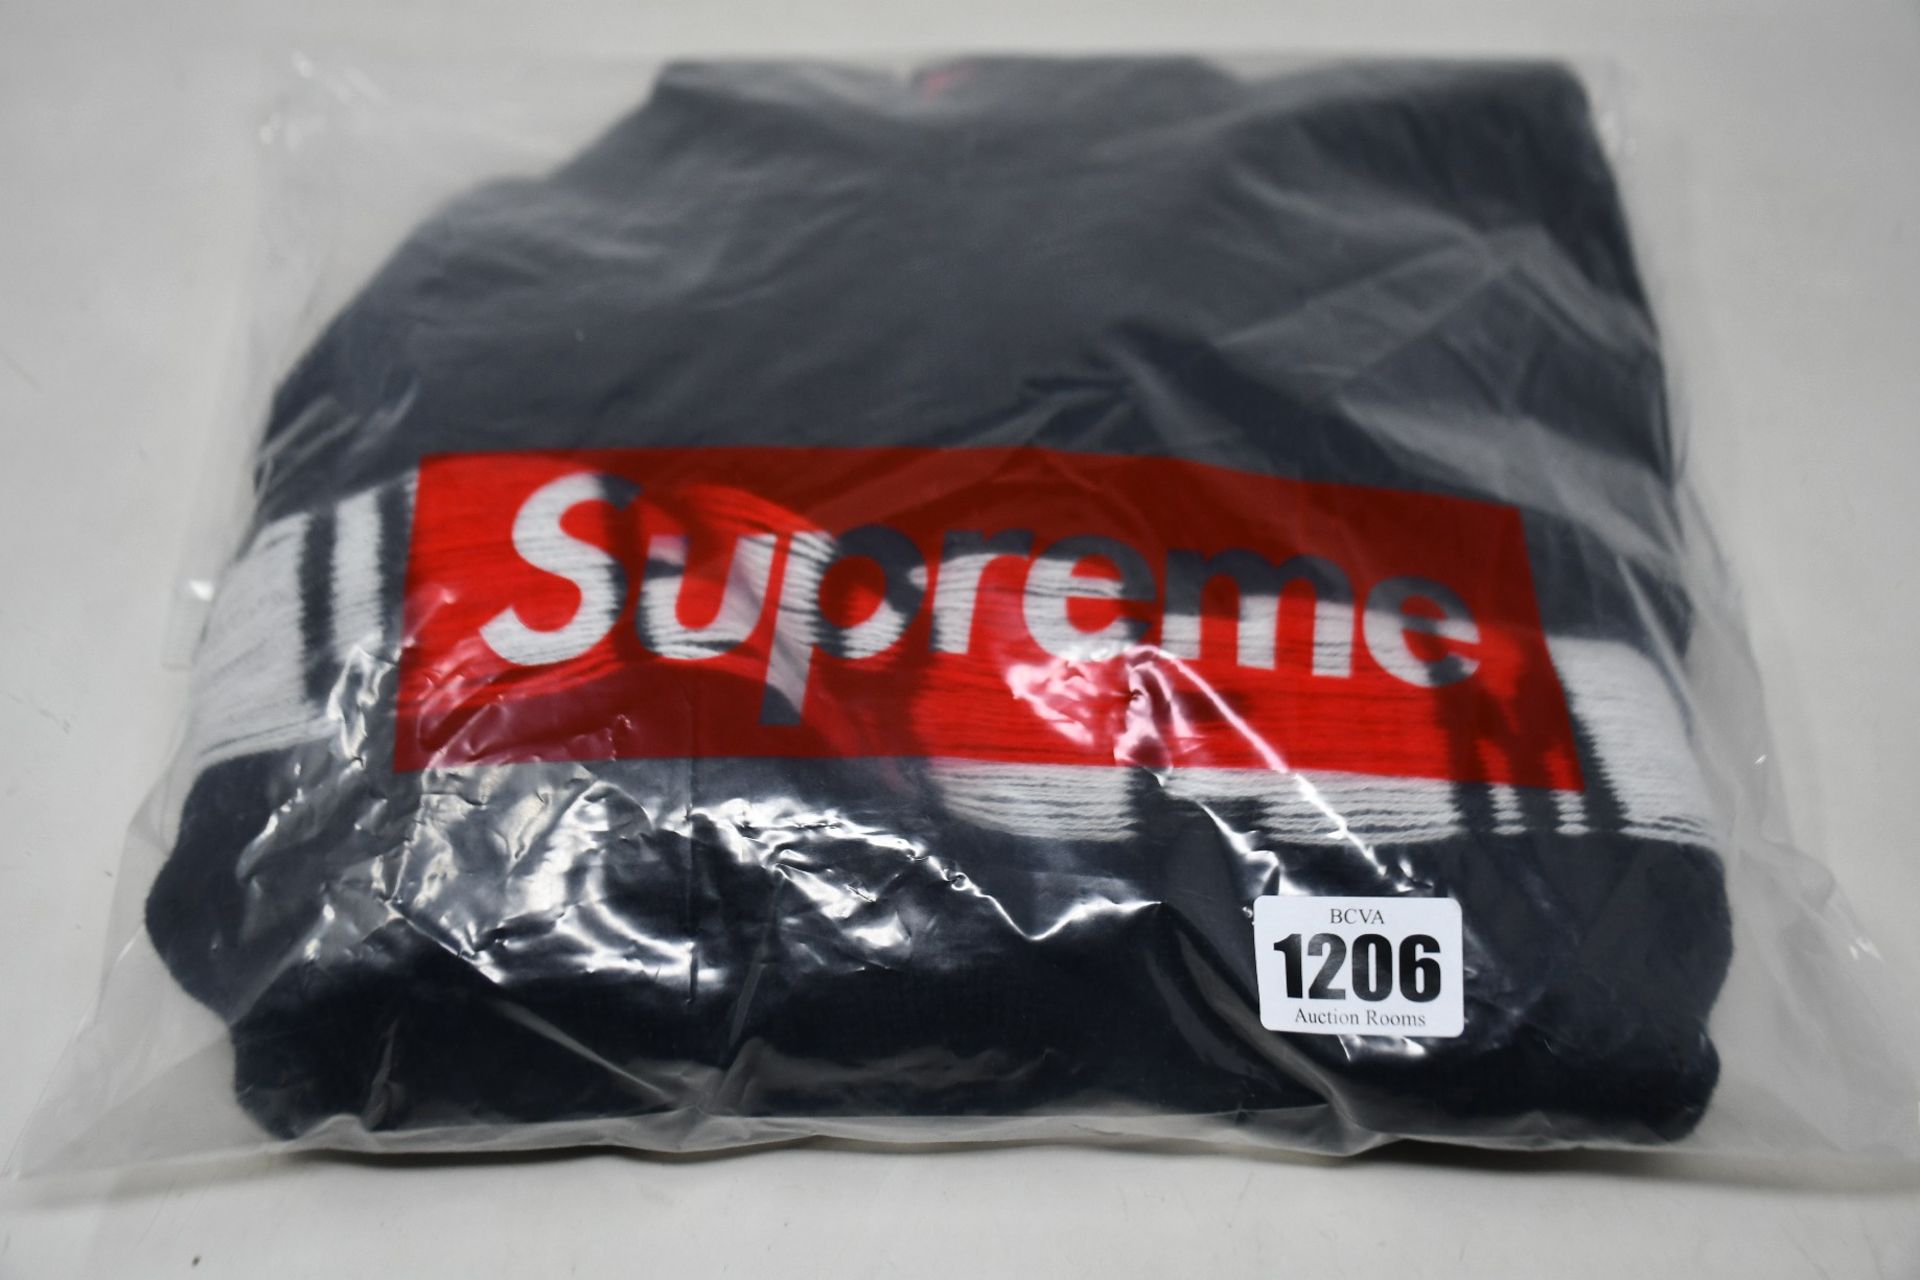 An as new Supreme Inside Out Logo sweater (M).